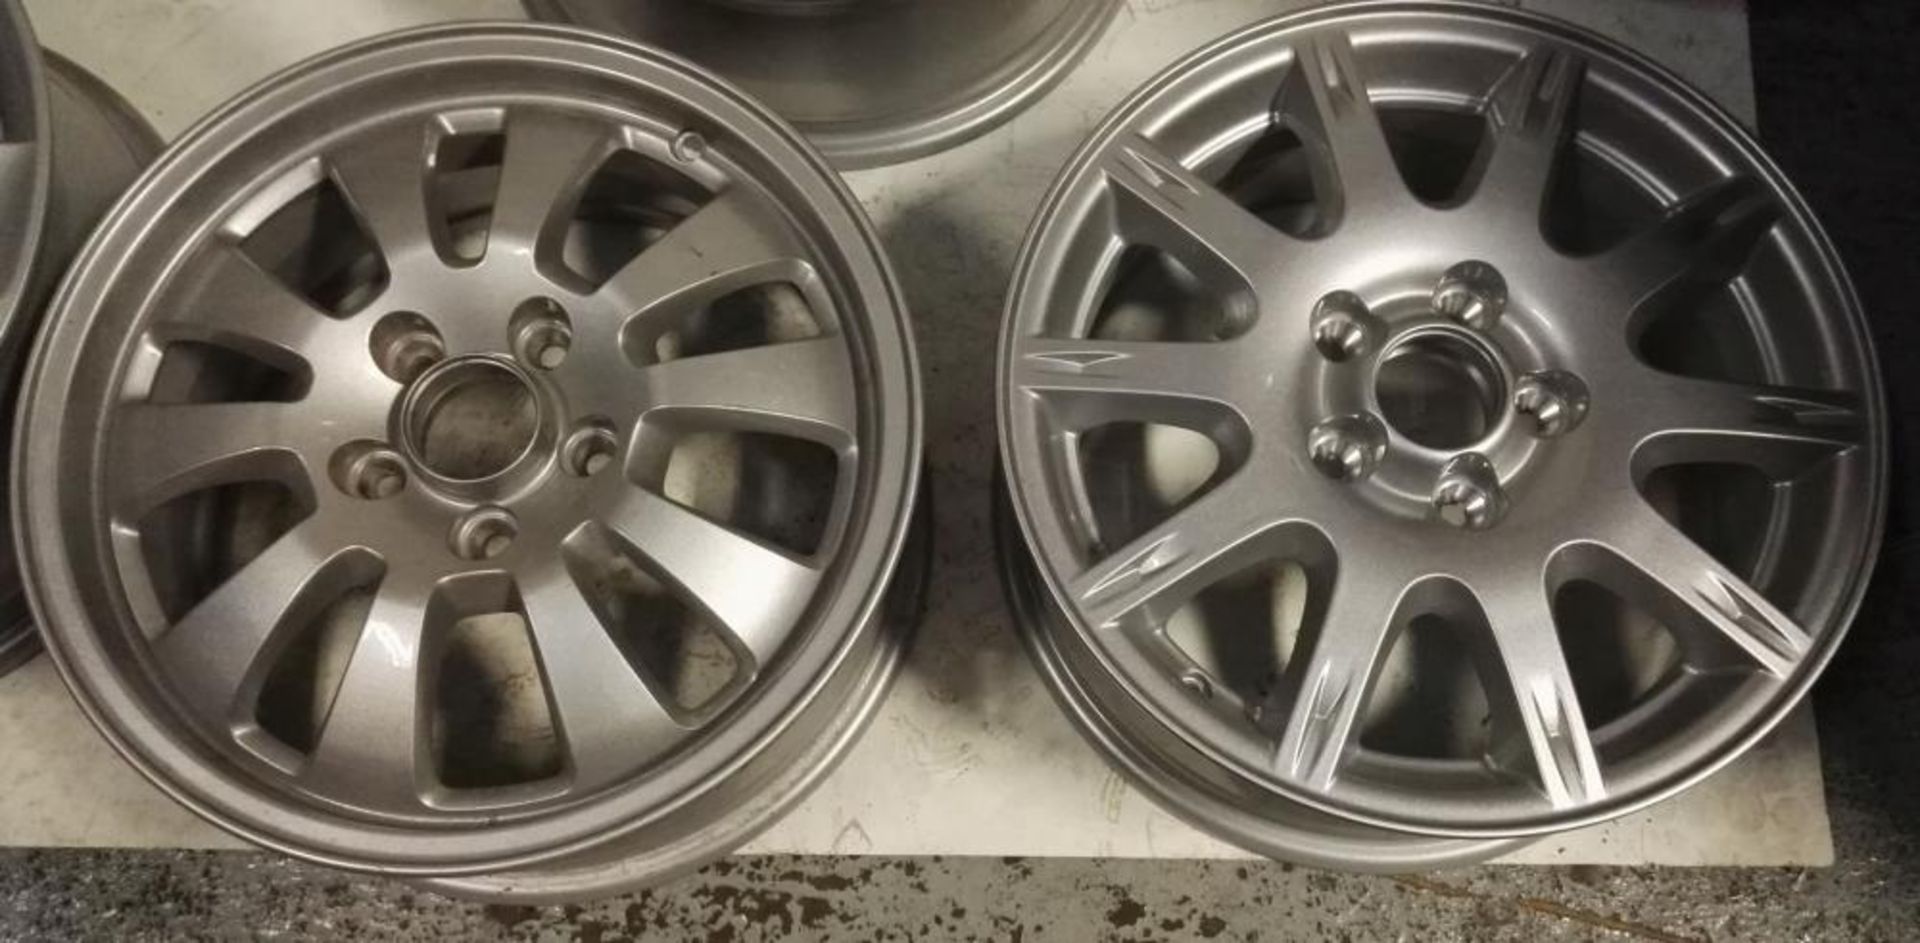 8 x Assorted Alloy Wheels - 15" to 17" - Saab, Opel, Vauxhall, Renault, BBS - CL084 - Location: - Image 5 of 9